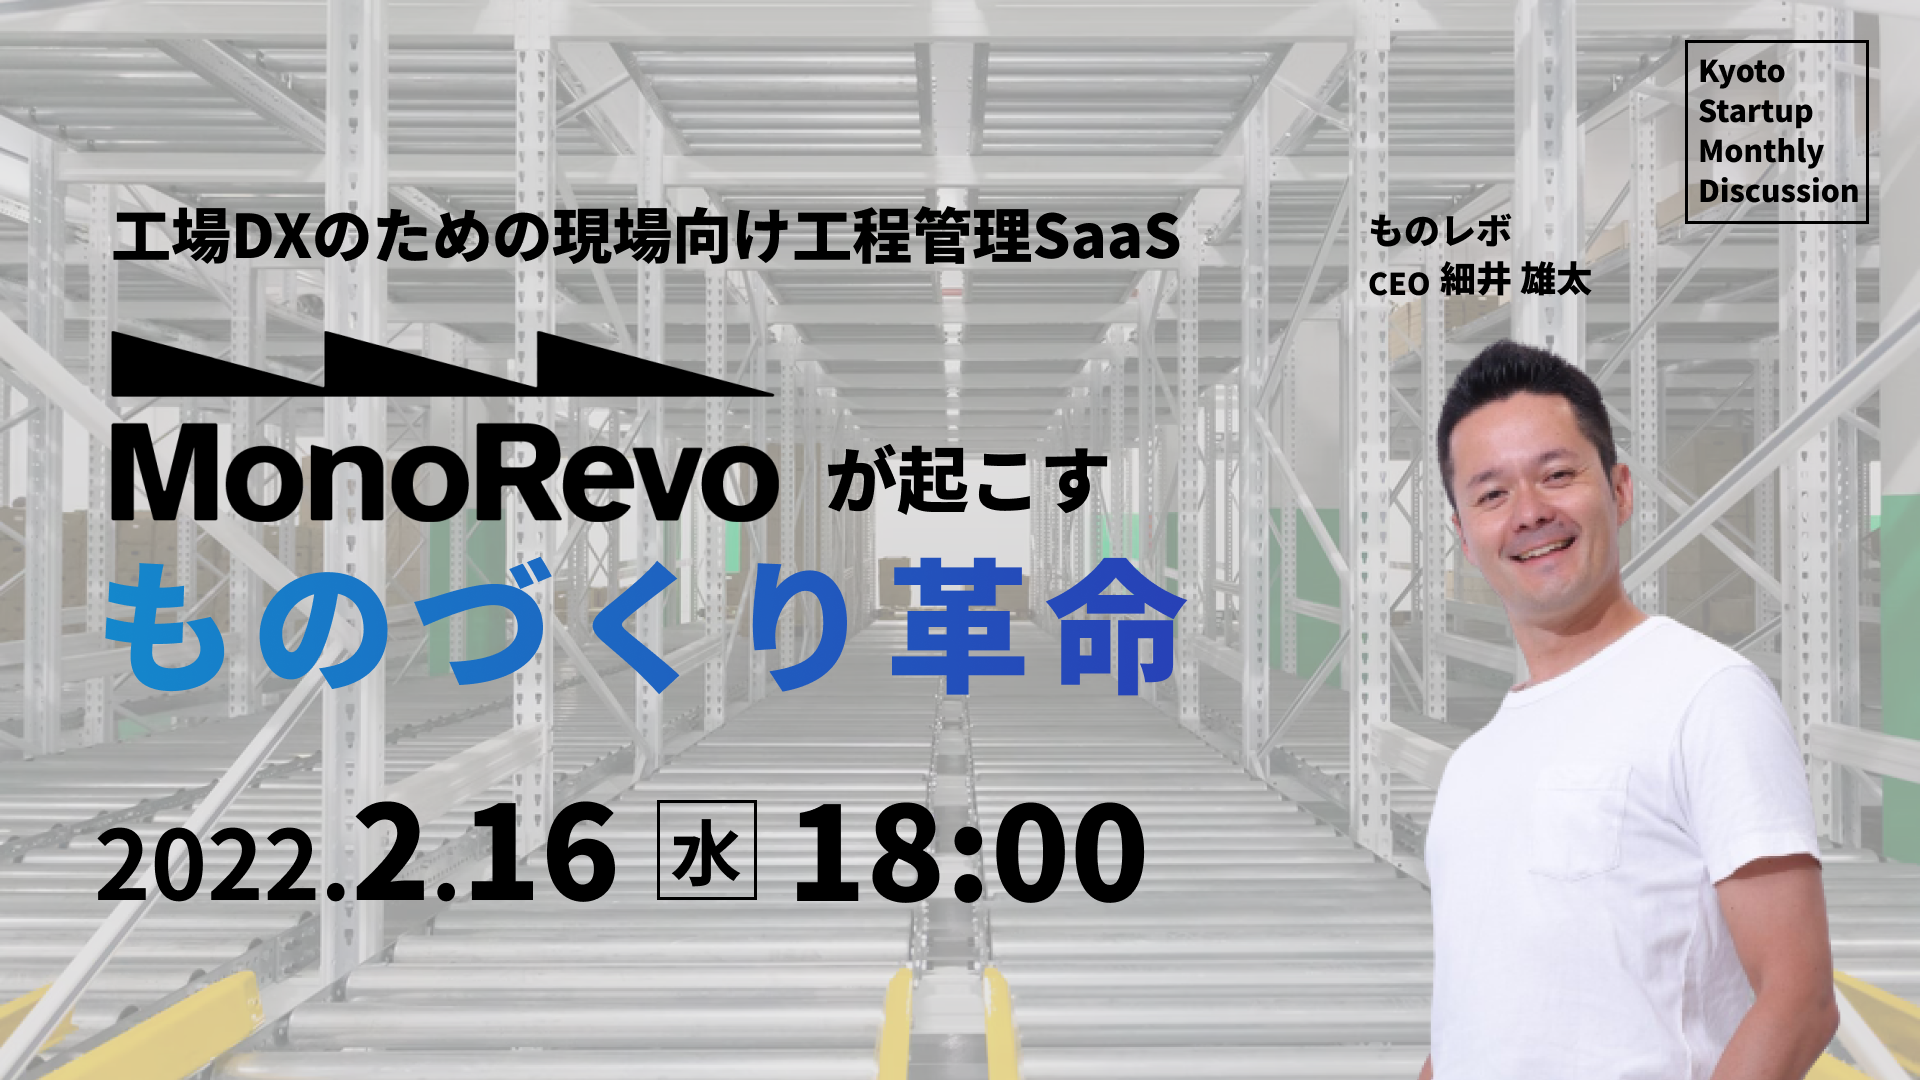 Kyoto Startup Monthly Discussion #09レポート（2022/2/16開催）